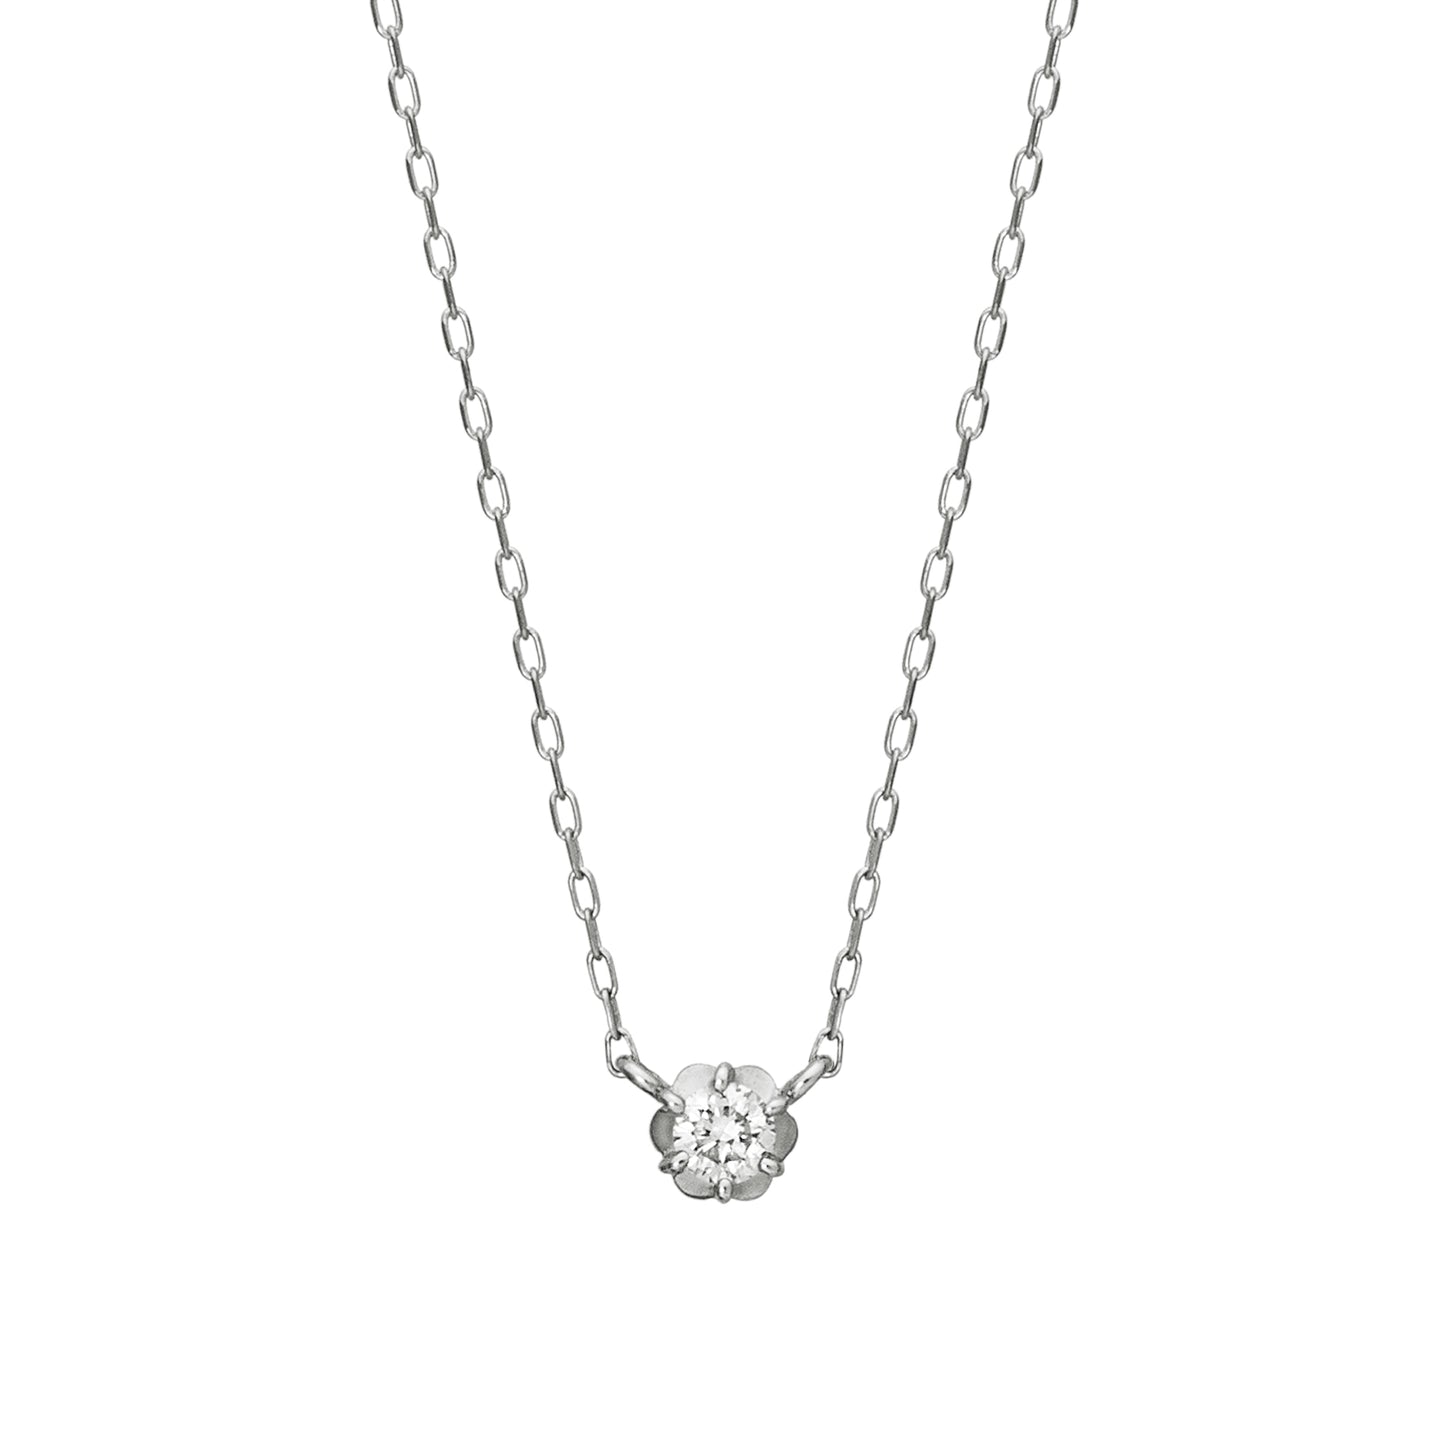 Fiolette Setting Single Diamond Necklace 0.07ct (10K White Gold) - Product Image